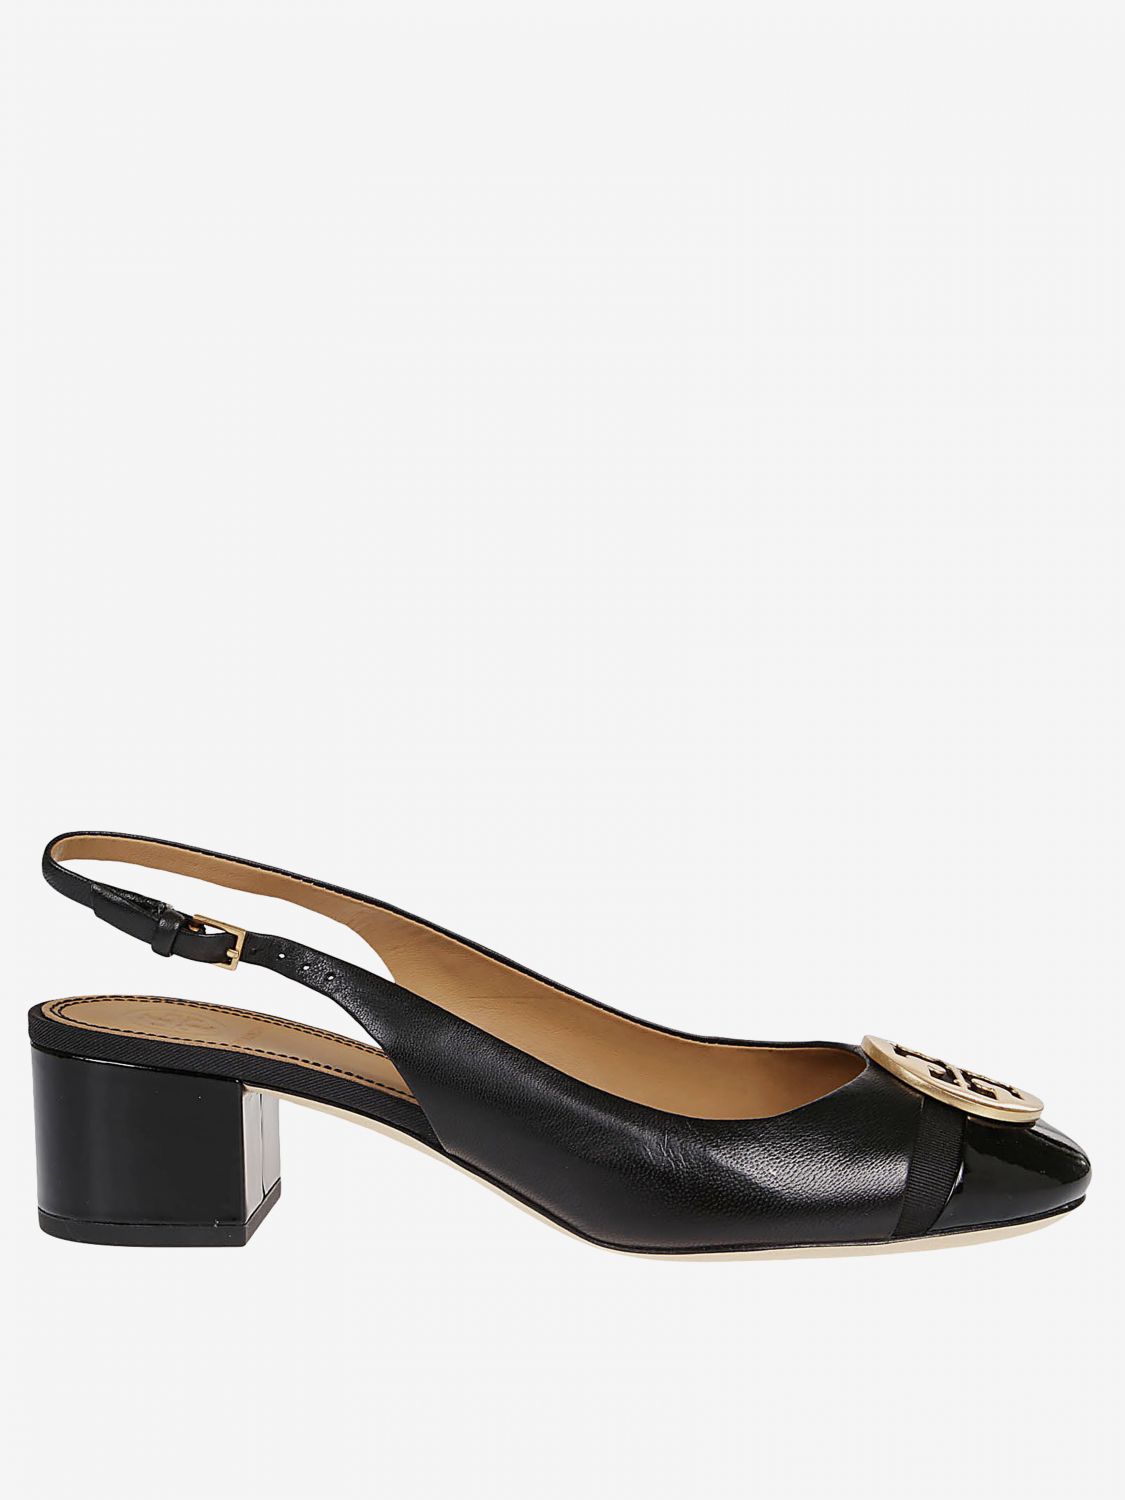 Tory Burch Outlet: high heel shoes for woman - Black | Tory Burch high heel  shoes 61752 online on 